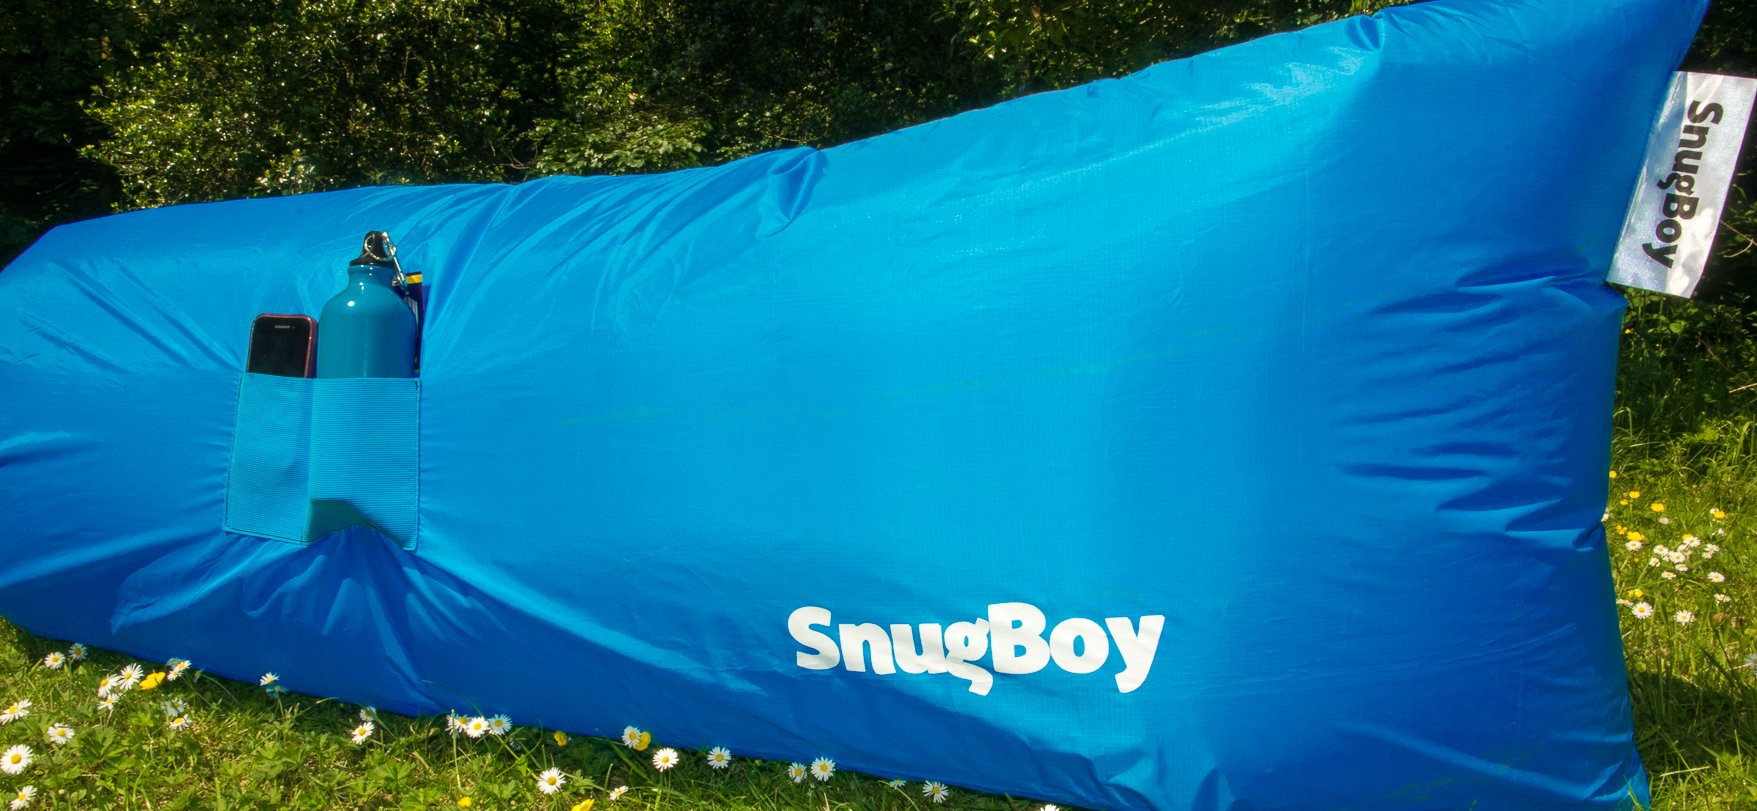 The Snug Boy inflatable lounge chair is great for sitting around in the sun